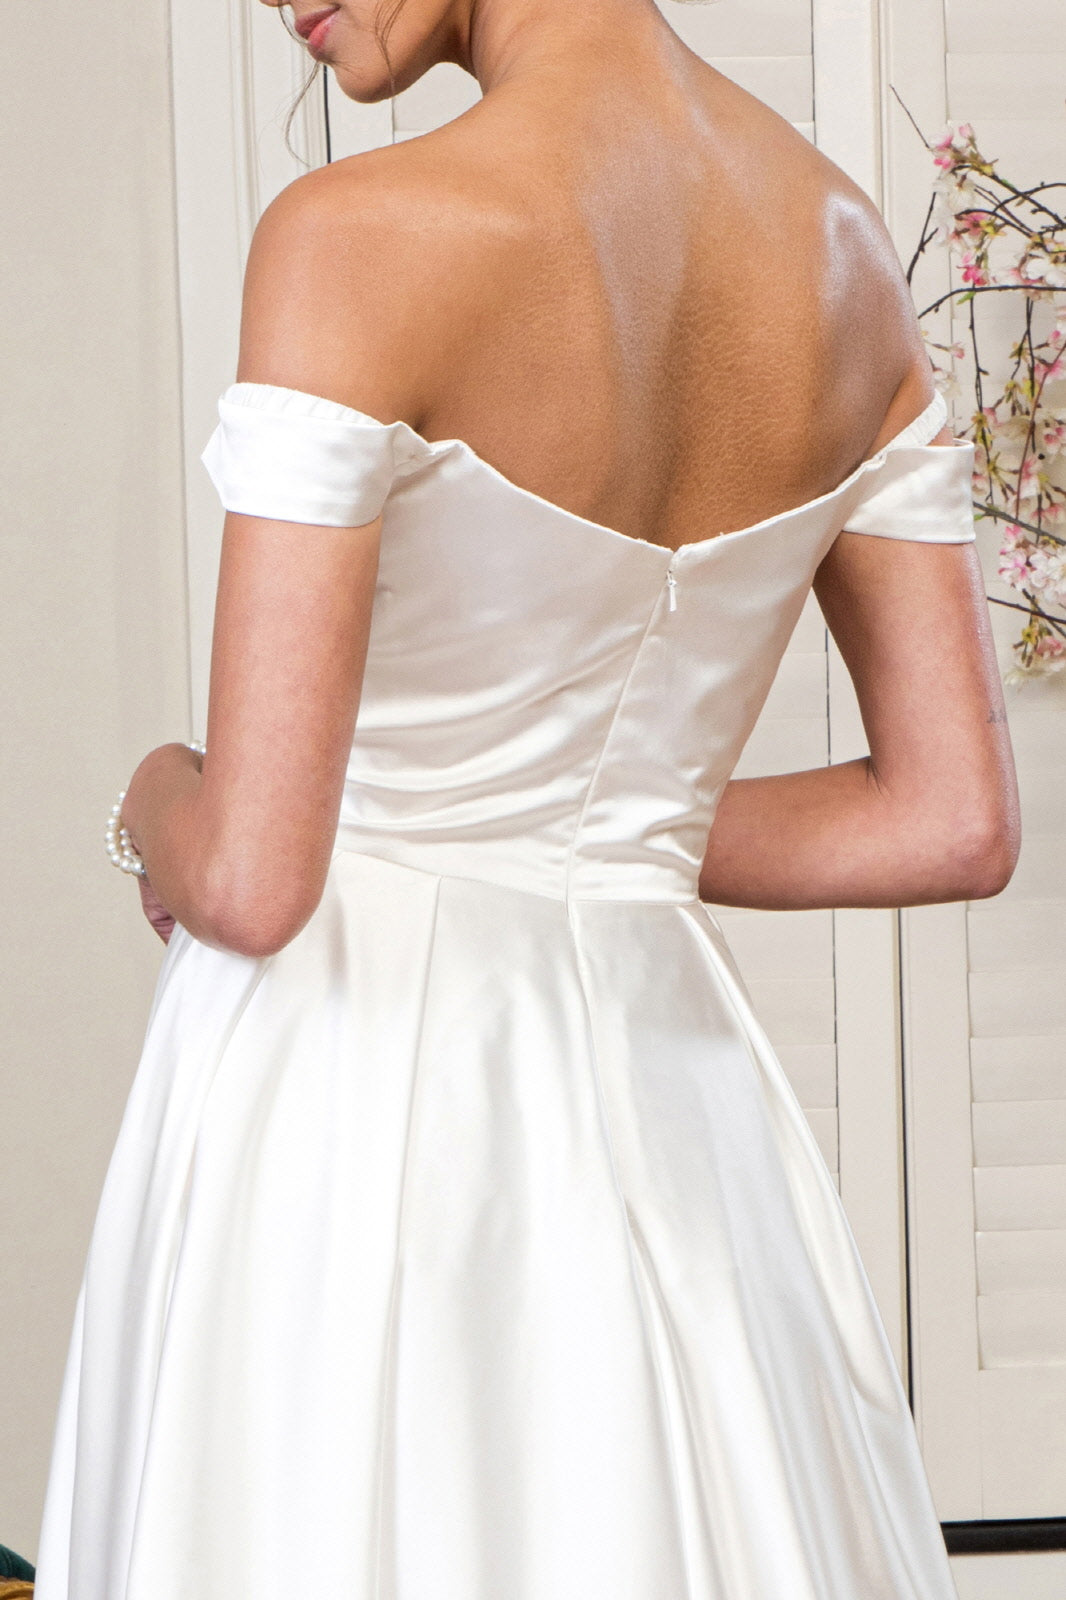 Pleated Waistline Sweethearted Cut-Away Shoulder Satin A-Line Dress - Mask Not Included GLGL1908 Elsy Style Wedding Dress